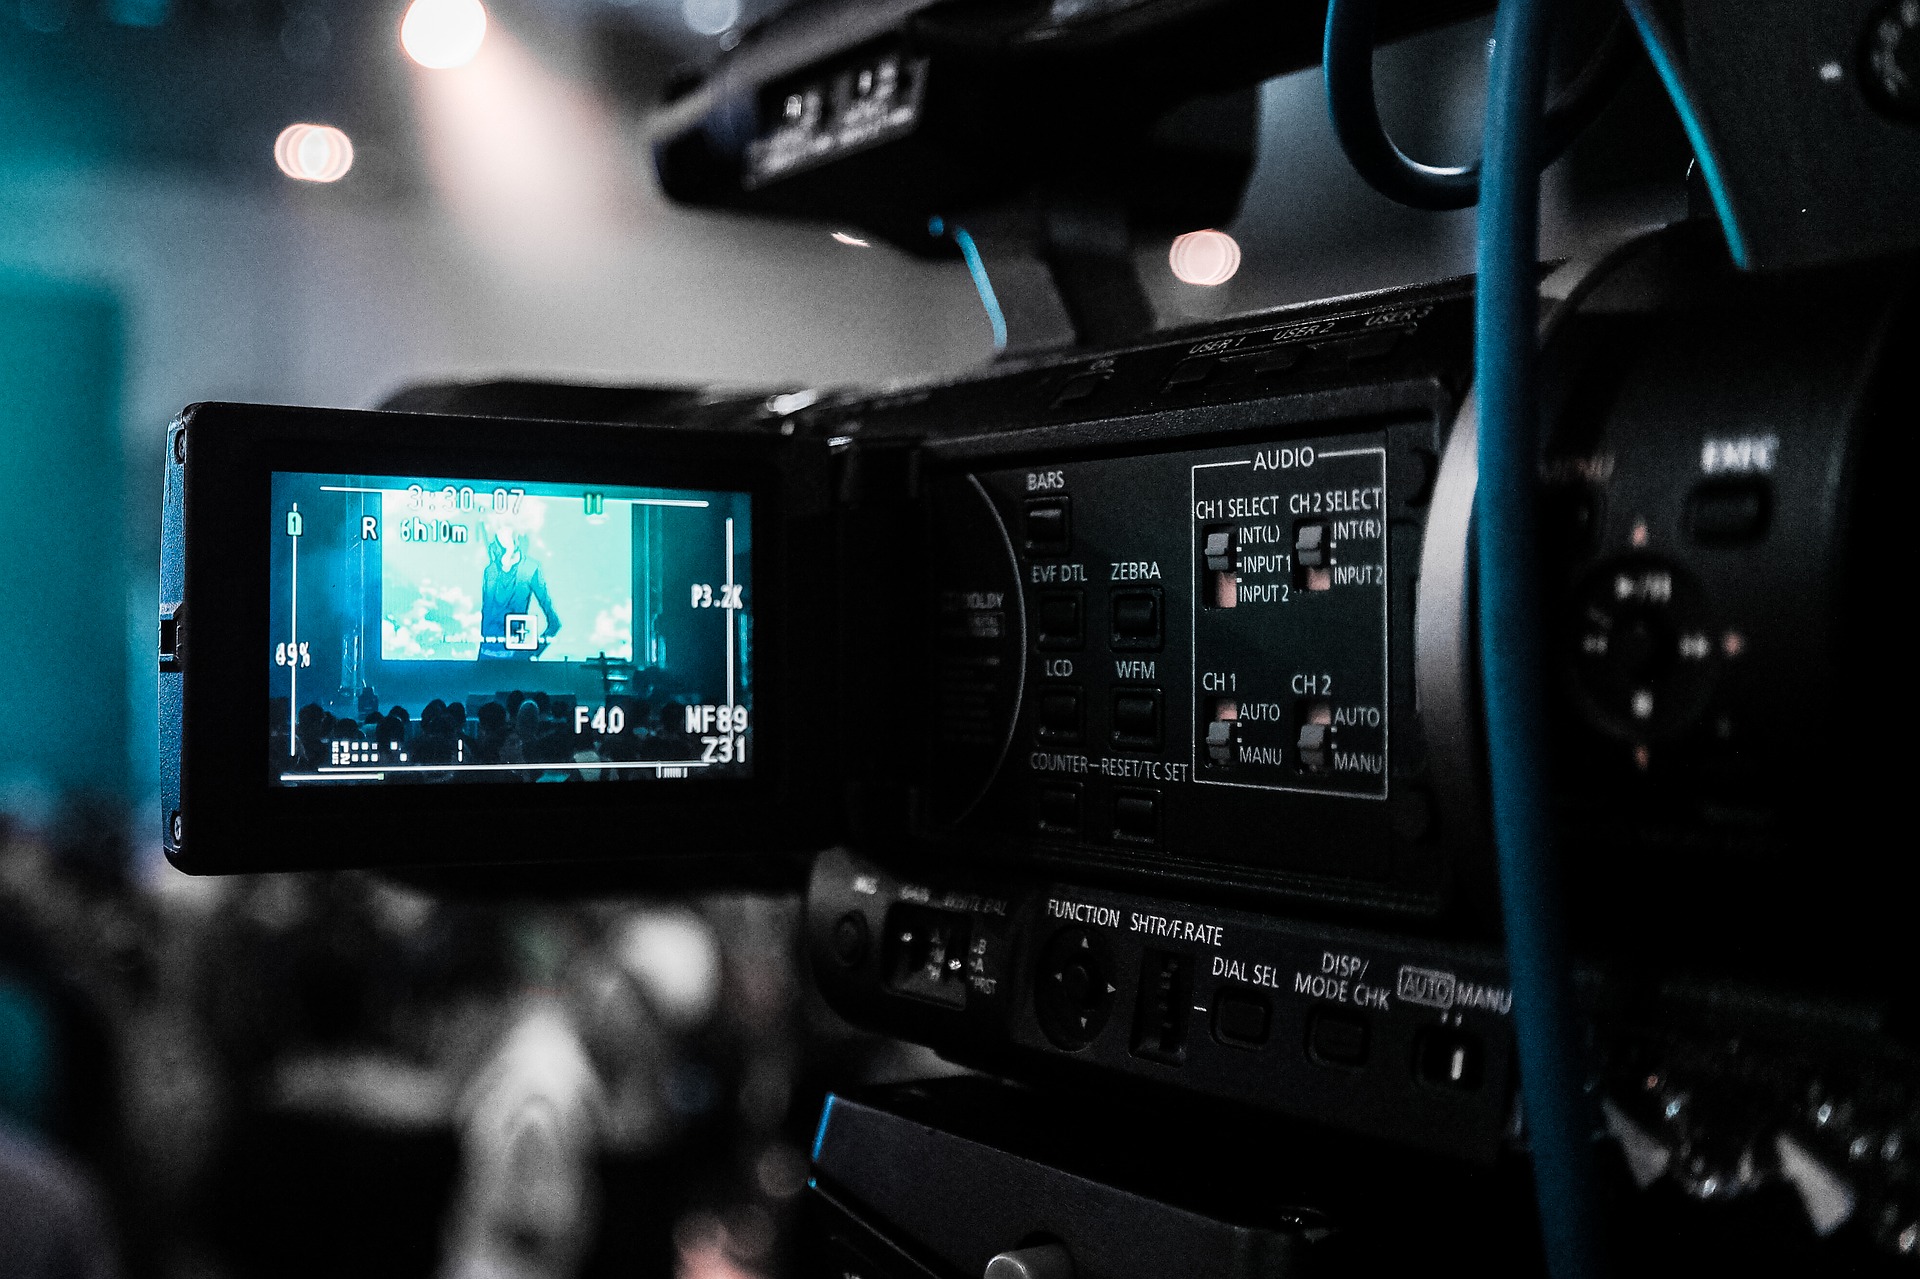 5 reasons to use video marketing to drive sales